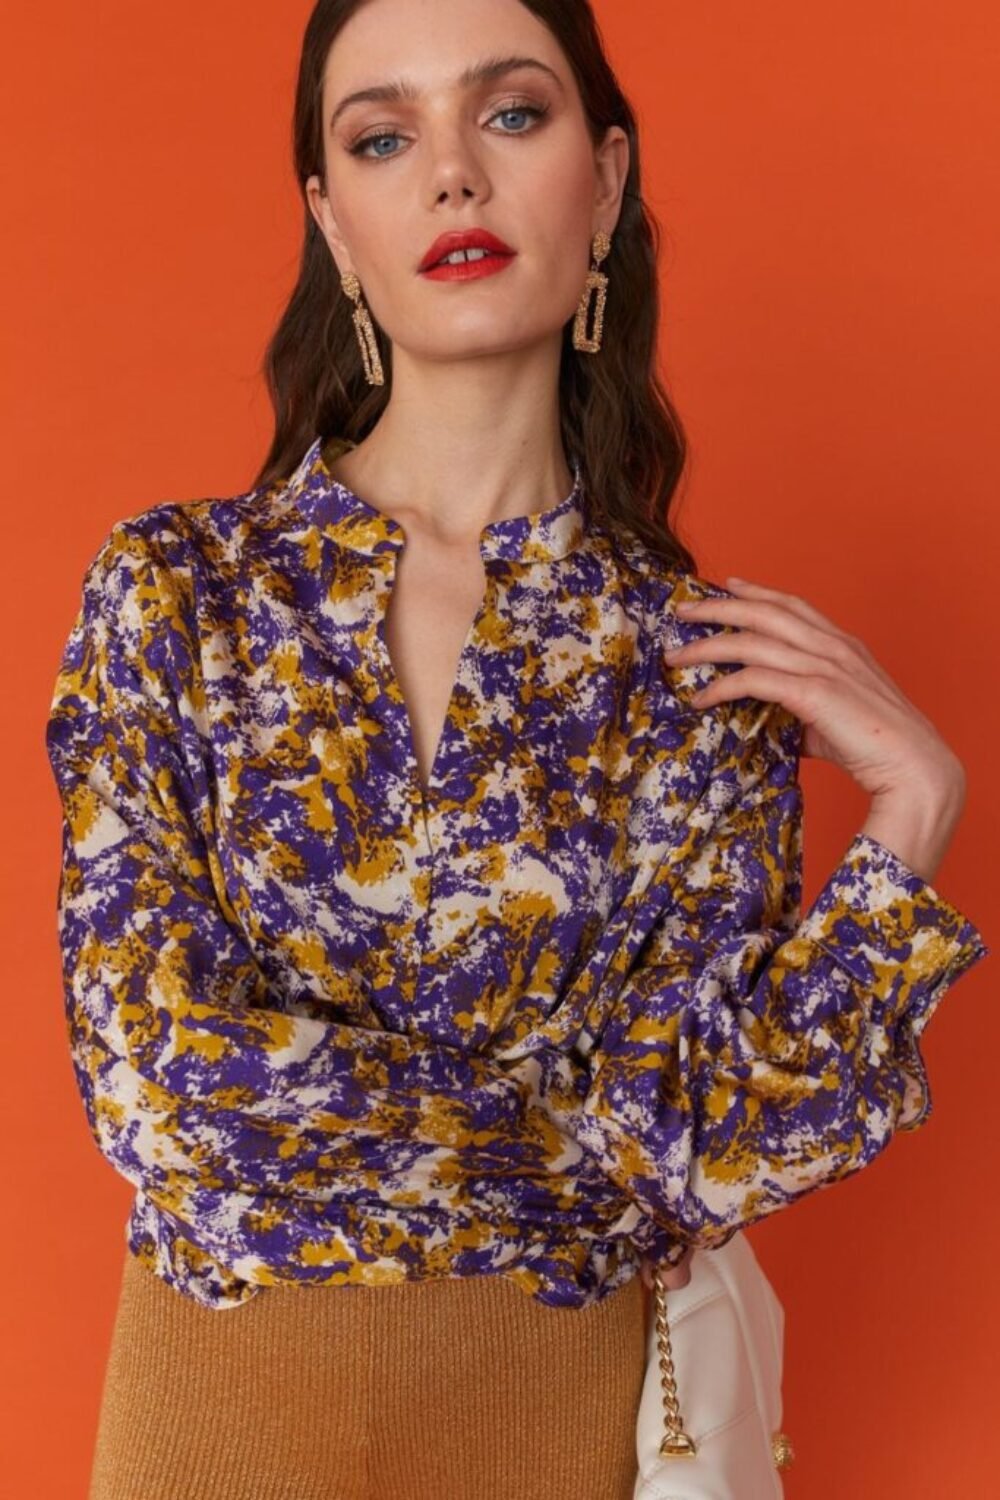 Shop Lux Tie Dye Silk Blend Blouse in Purple and Yellow and women's luxury and designer clothes at www.lux-apparel.co.uk